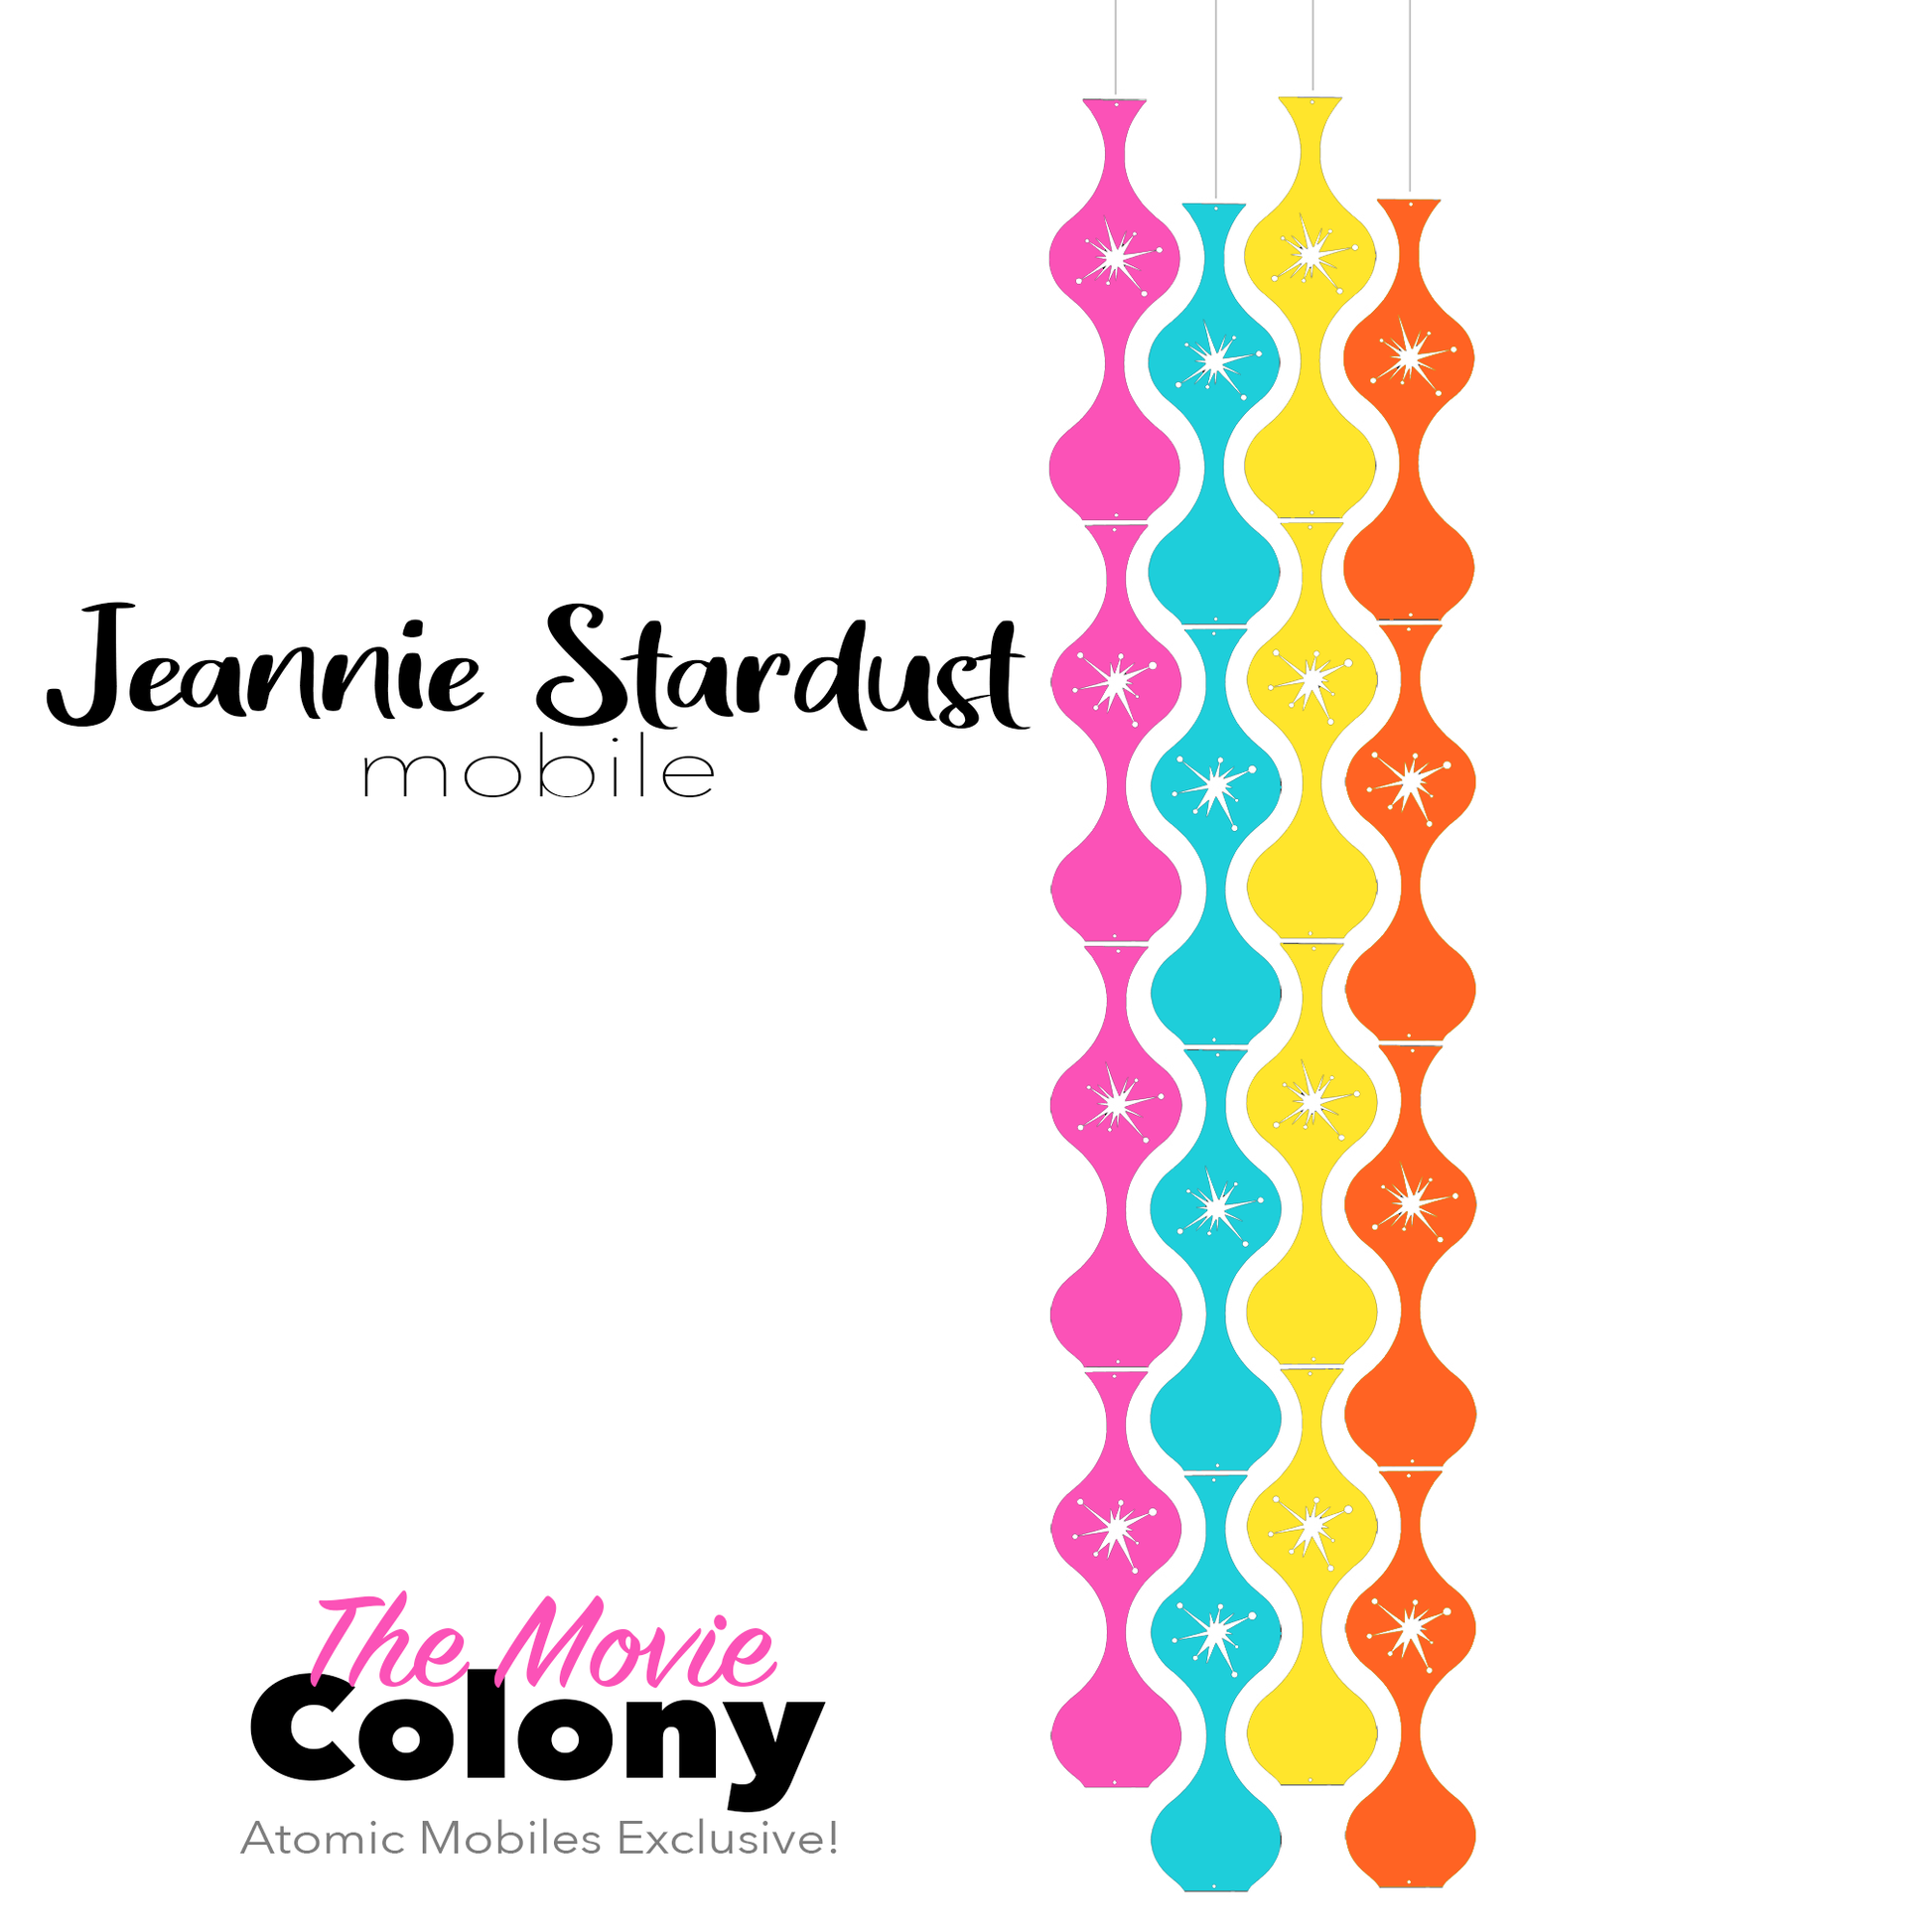 The Movie Colony Jeannie Stardust Hanging Art Mobile - mid century modern home decor in Hot Pink, Aqua, Yellow, and Orange - by AtomicMobiles.com